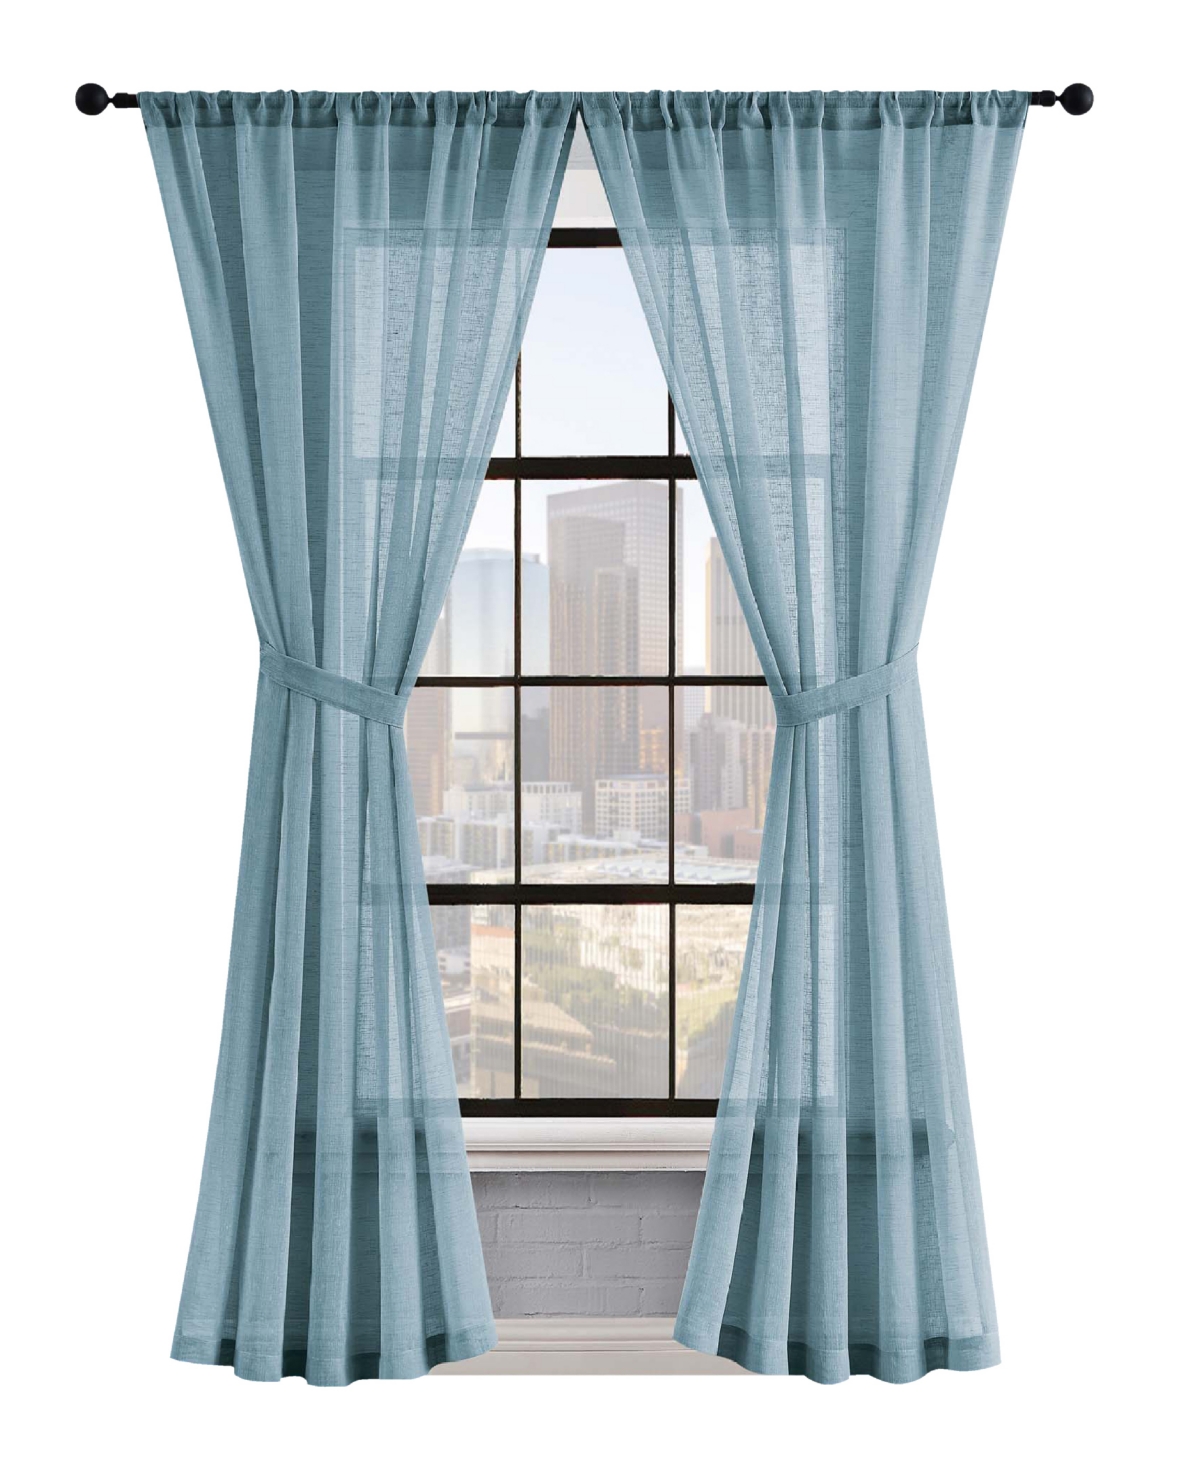 Shop Lucky Brand Onyx Textured Sheer Voile Light Filtering Rod Pocket Window Curtain Panel Pair With Tiebacks, 52" X  In Denim Blue